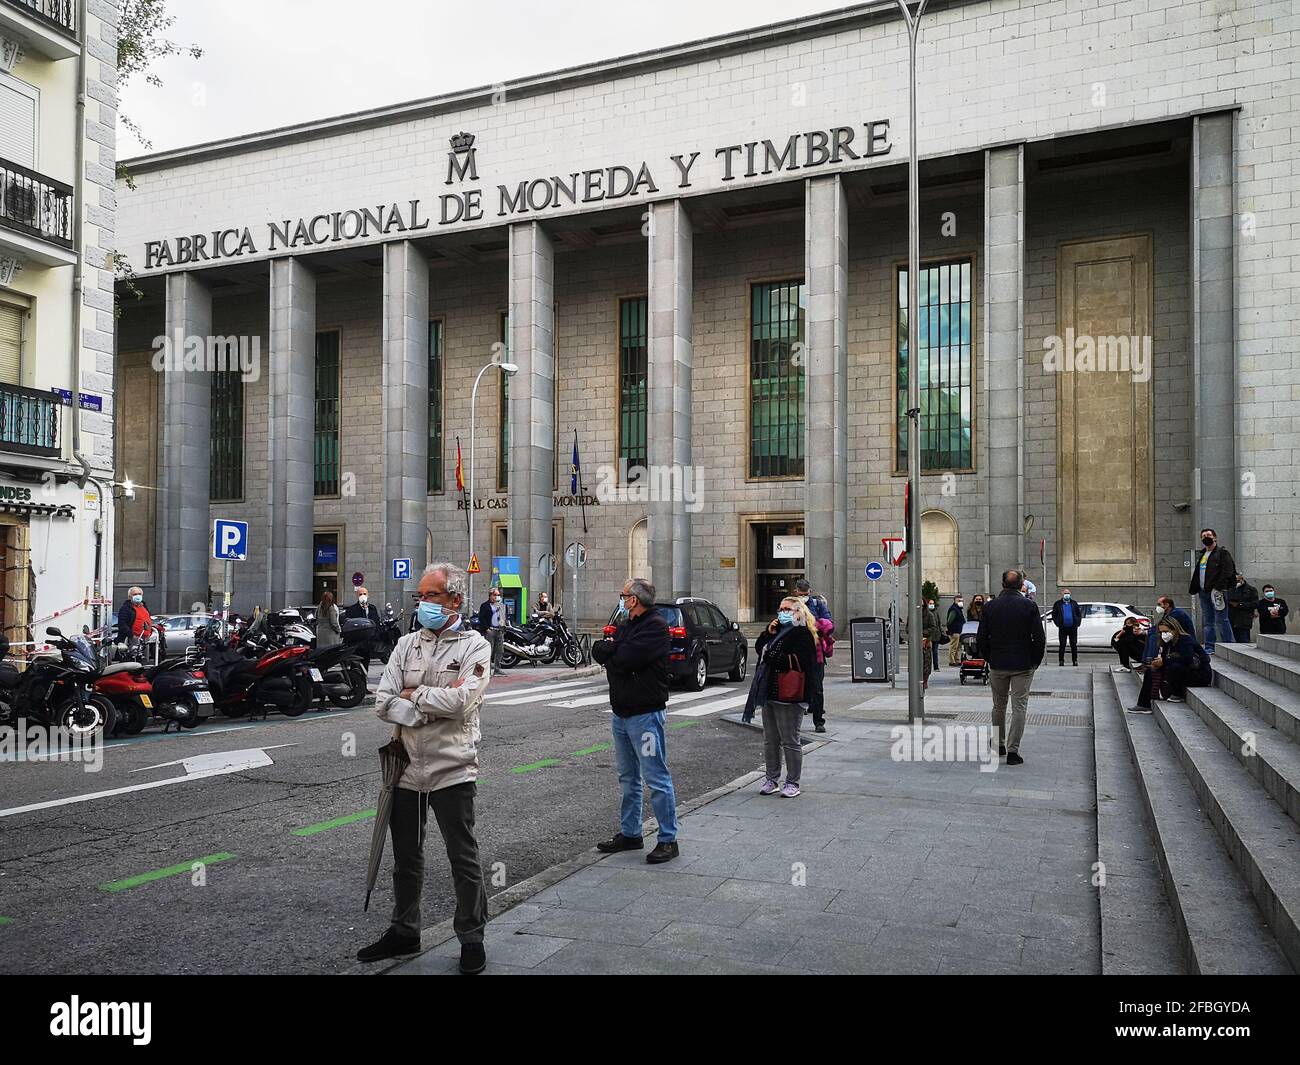 Madrid, Spain. April 23, 2021: Mature people wearing face protective masks in front of the 'Fabrica Nacional de Moneda y Timbre'. Stock Photo